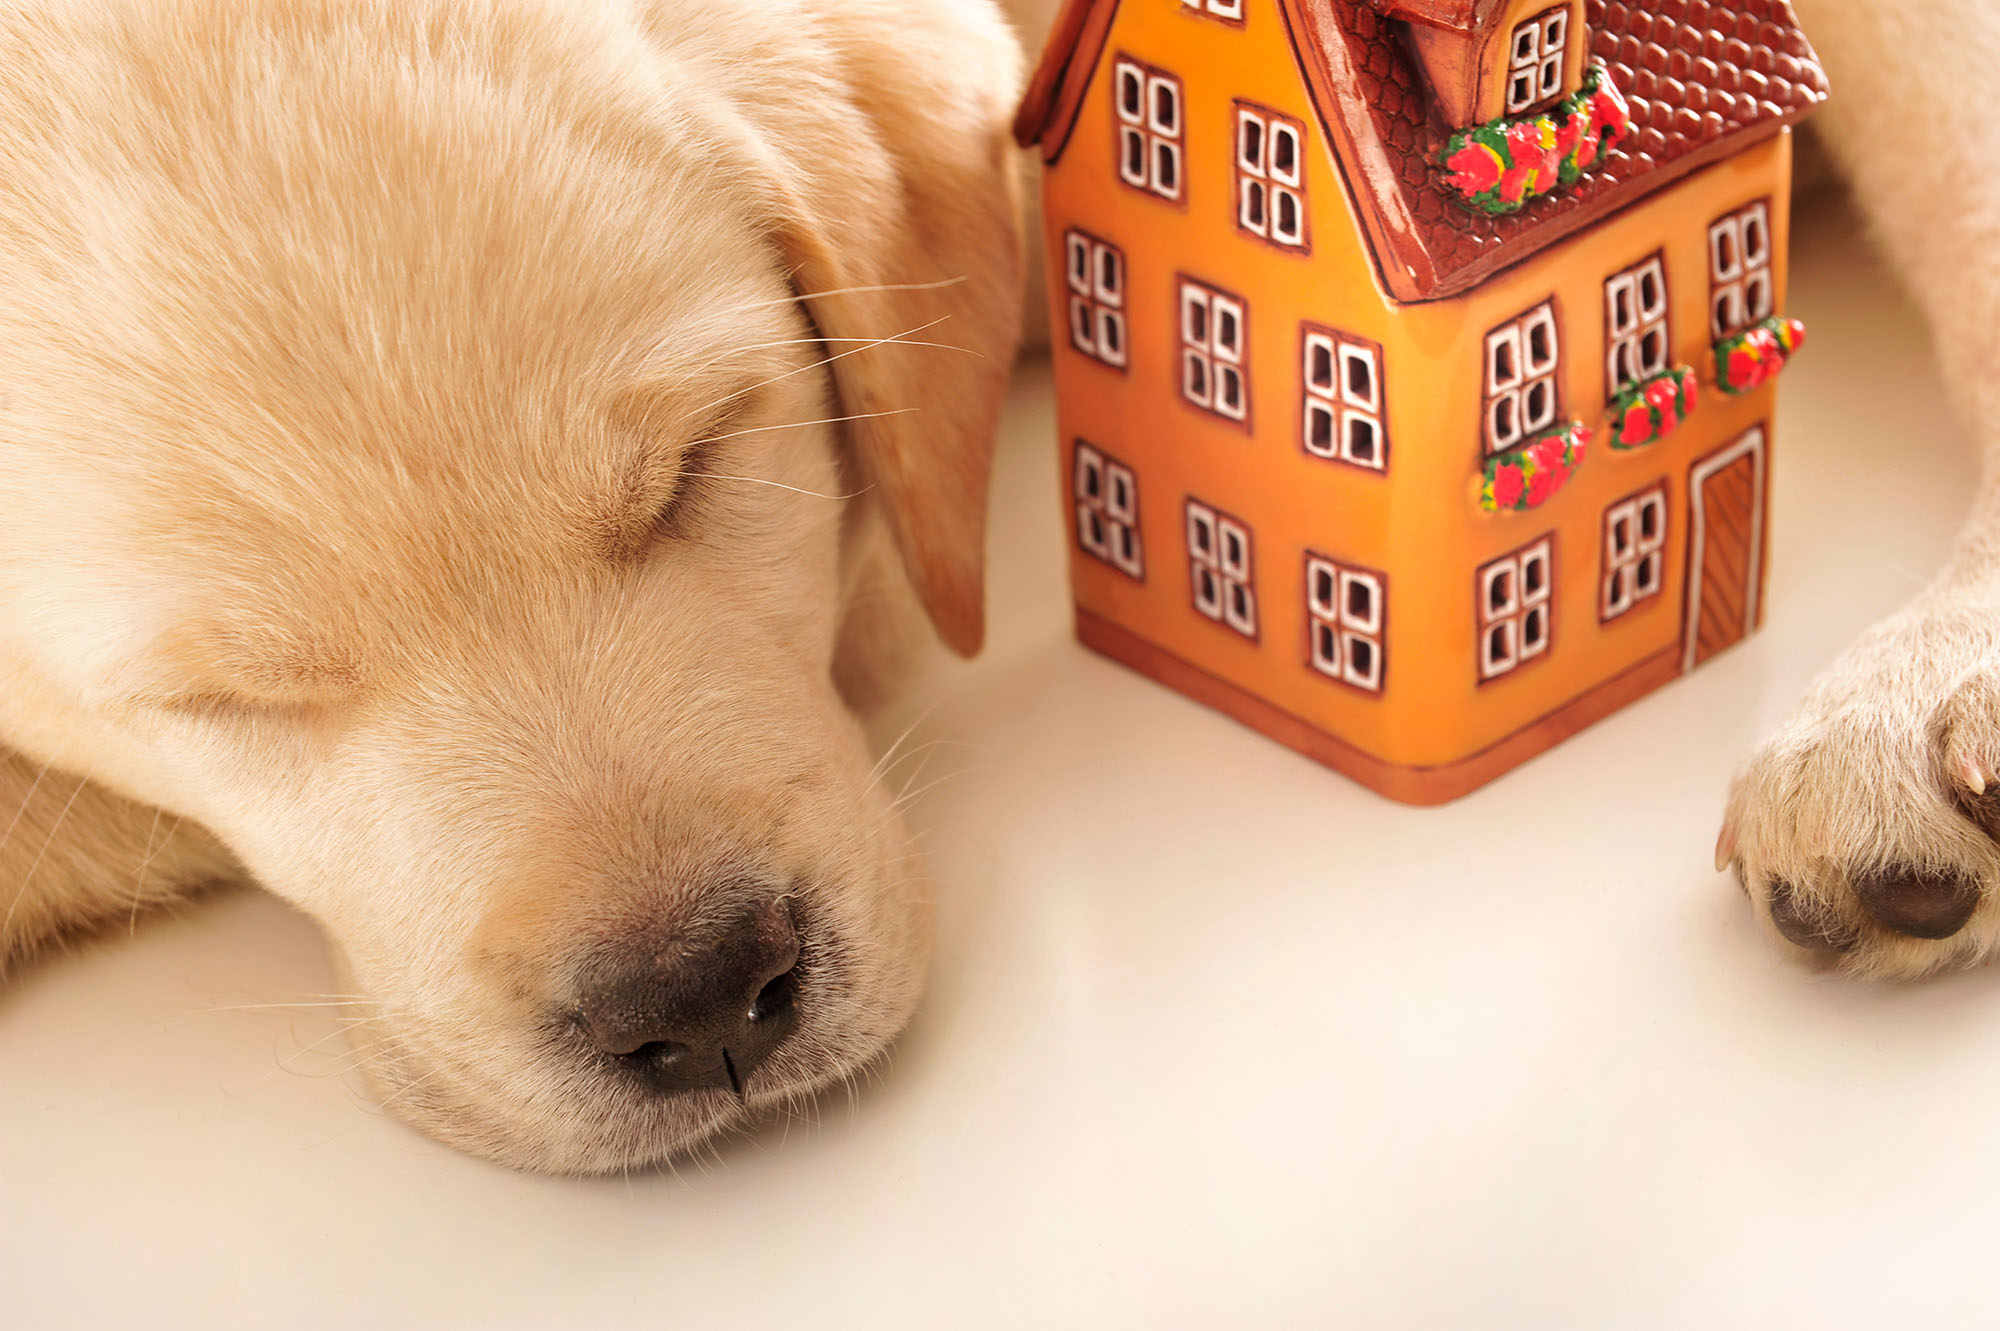 Puppy sleeping safely at home. Poop 911 Blog.